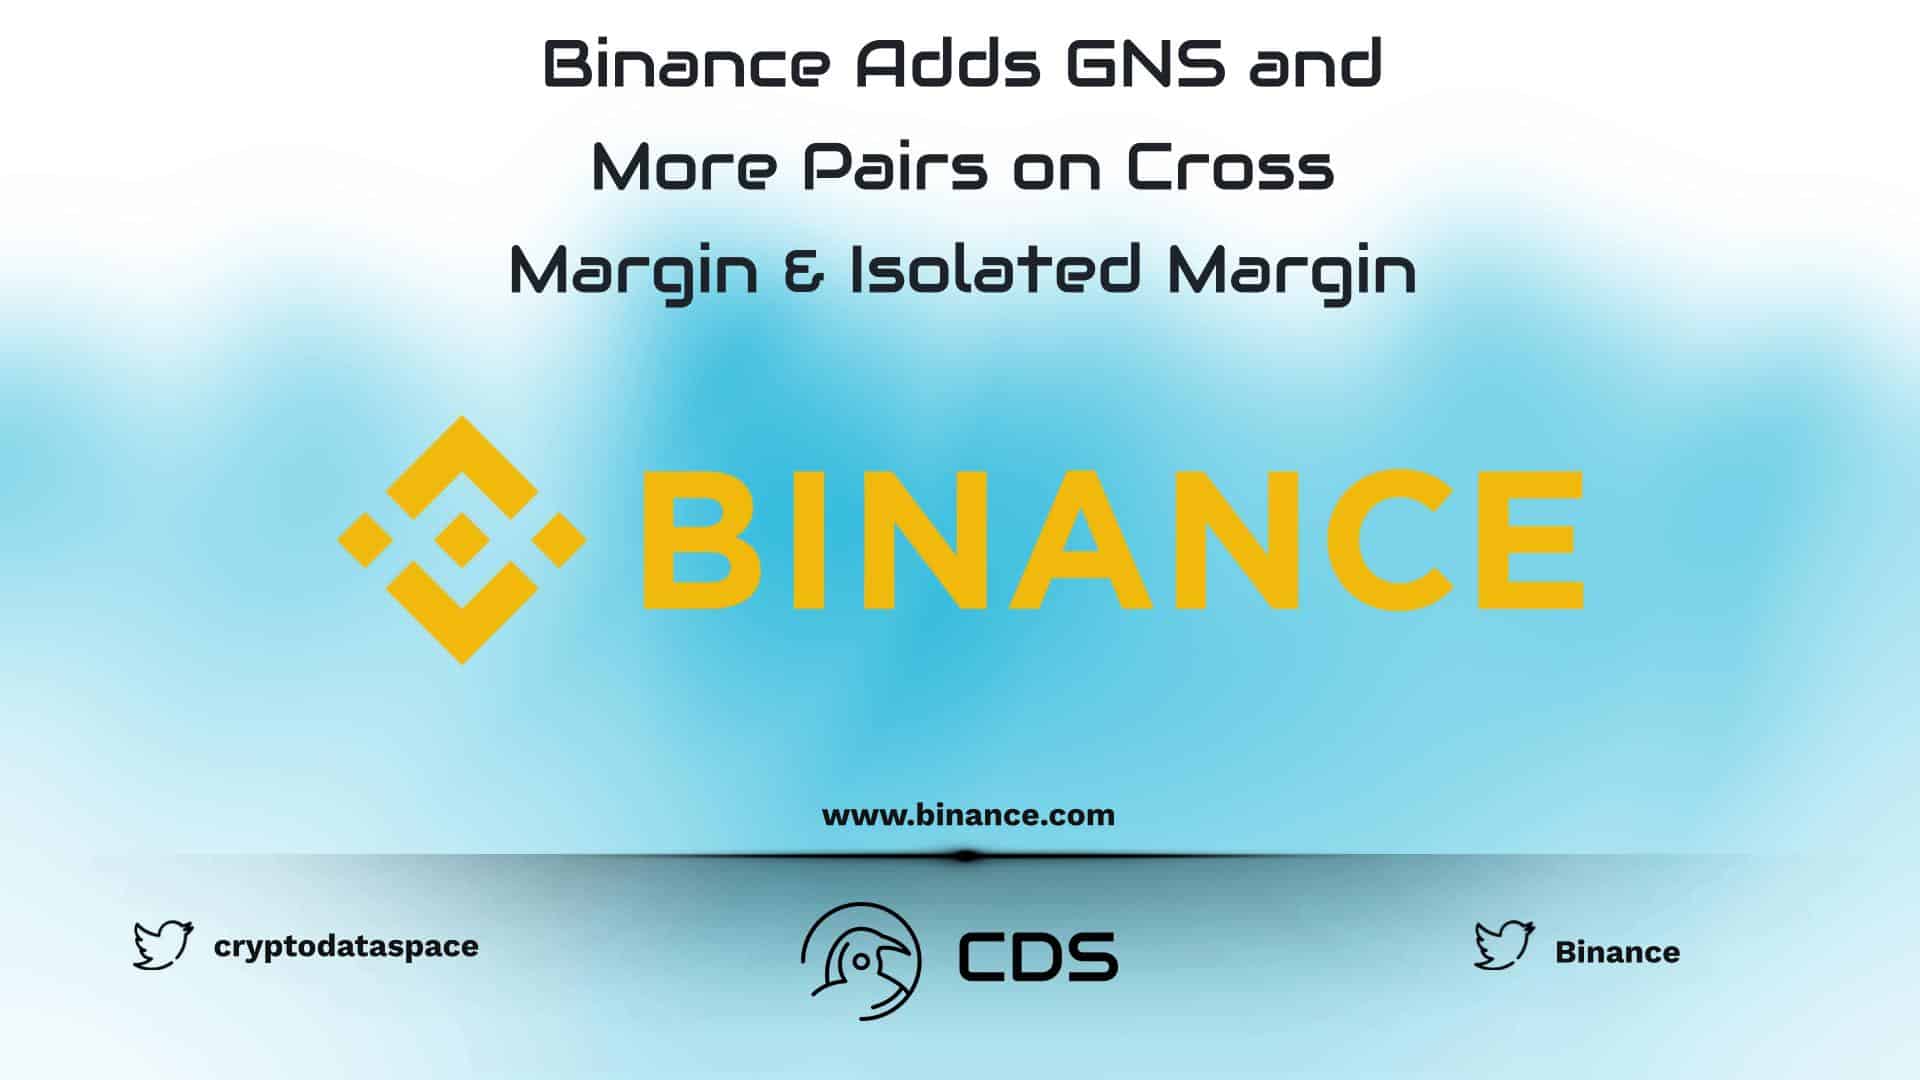 Binance Adds GNS and More Pairs on Cross Margin & Isolated Margin